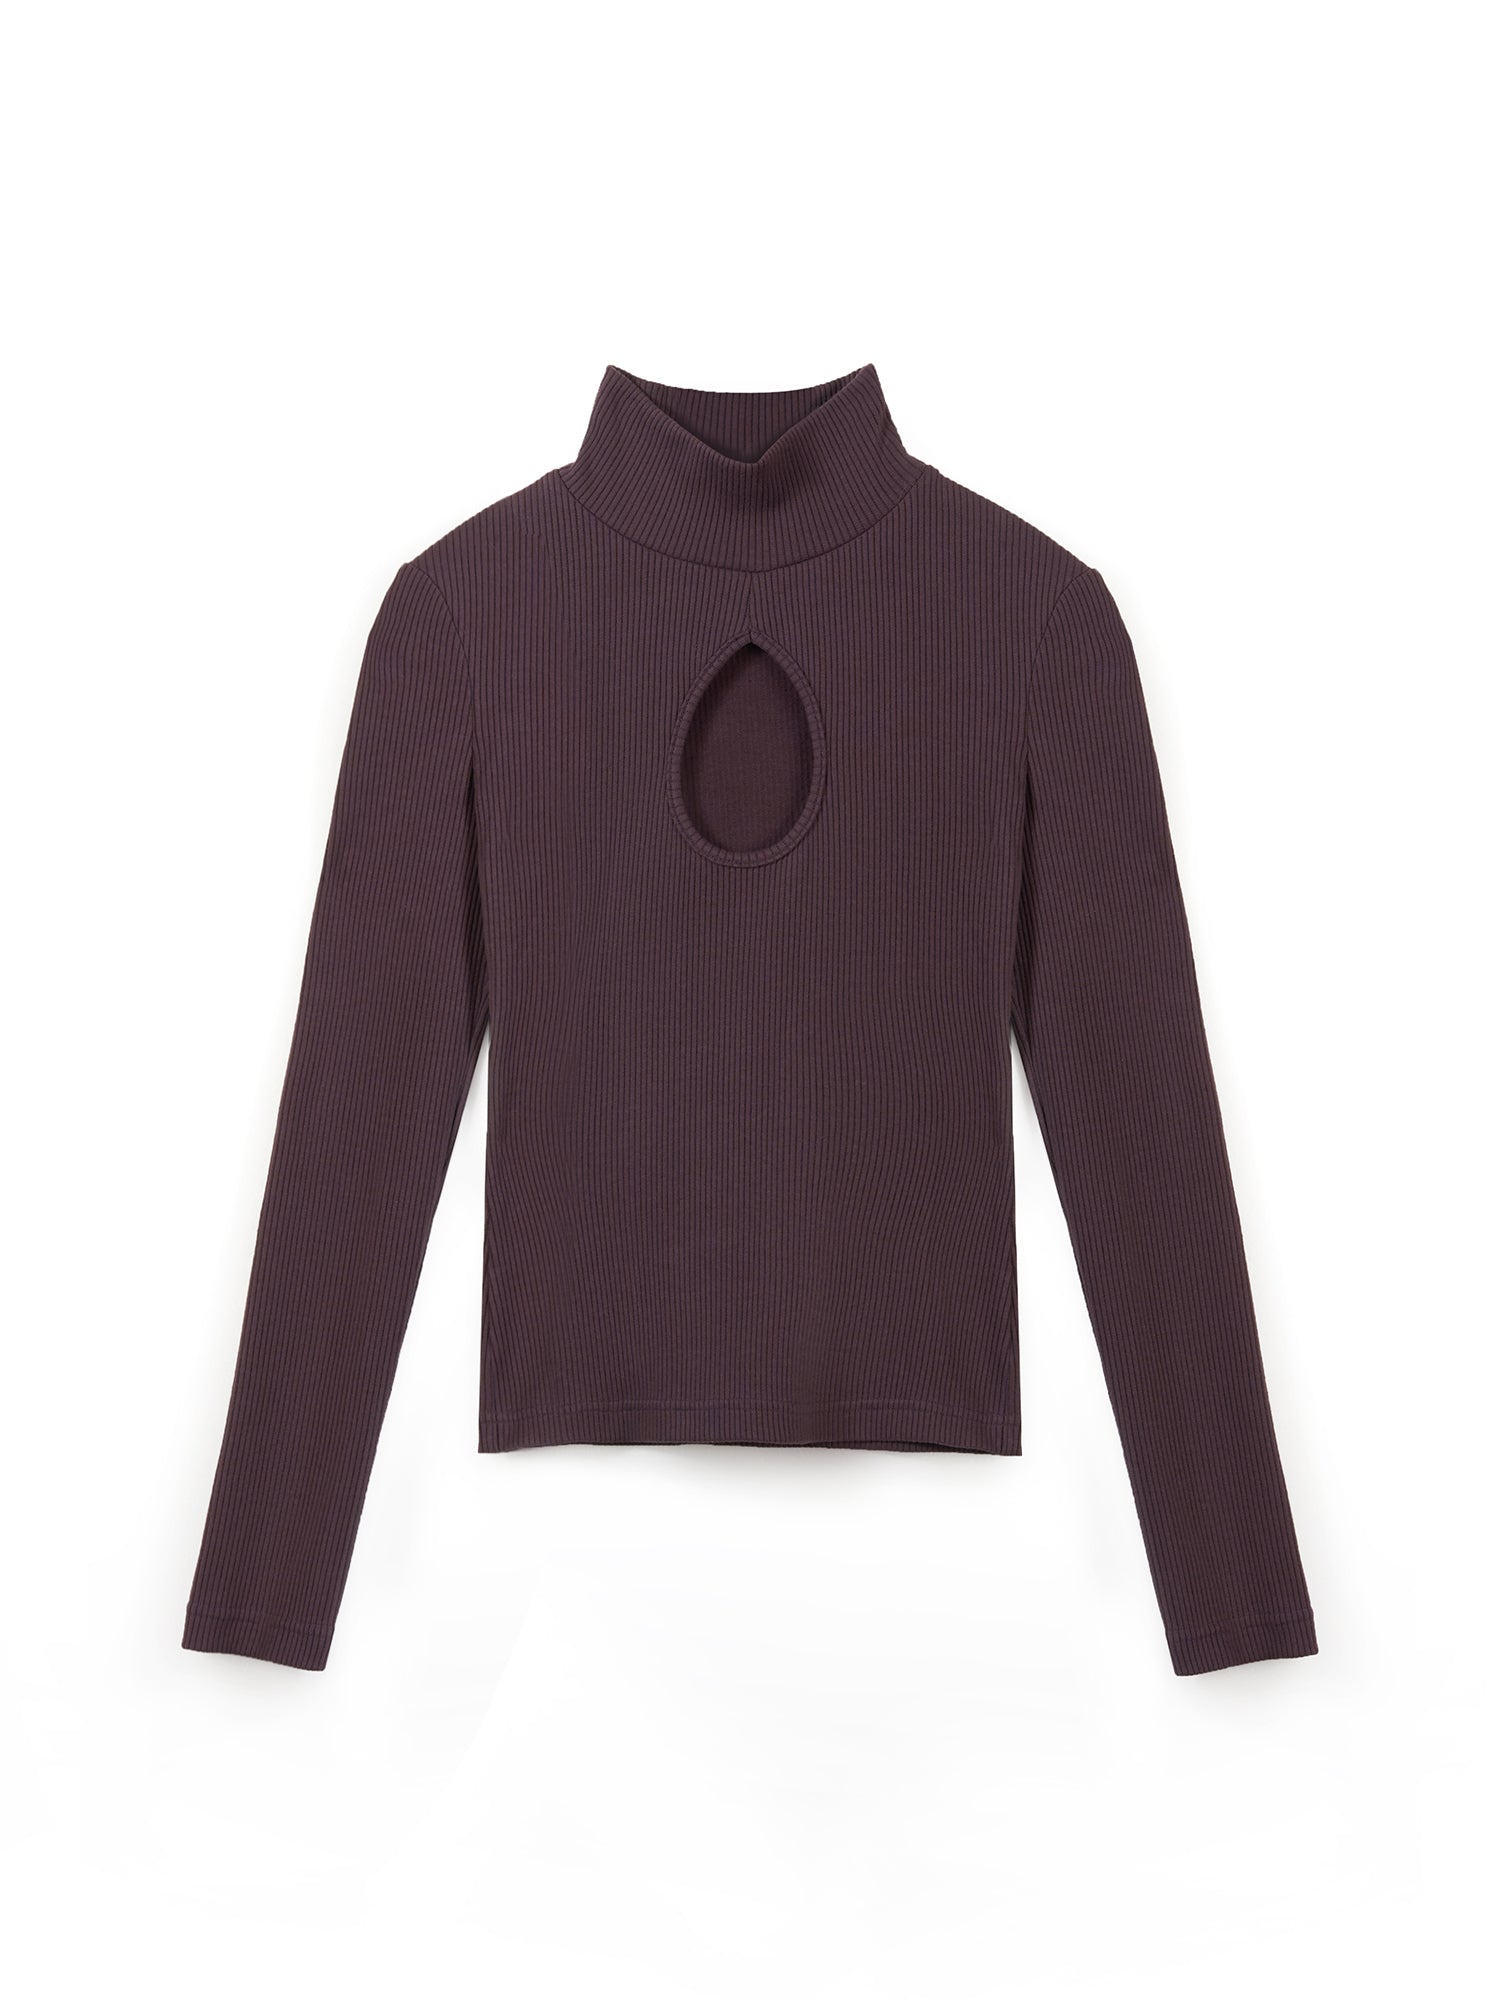 Opening Plum Ribbed Knit Long Sleeve Top